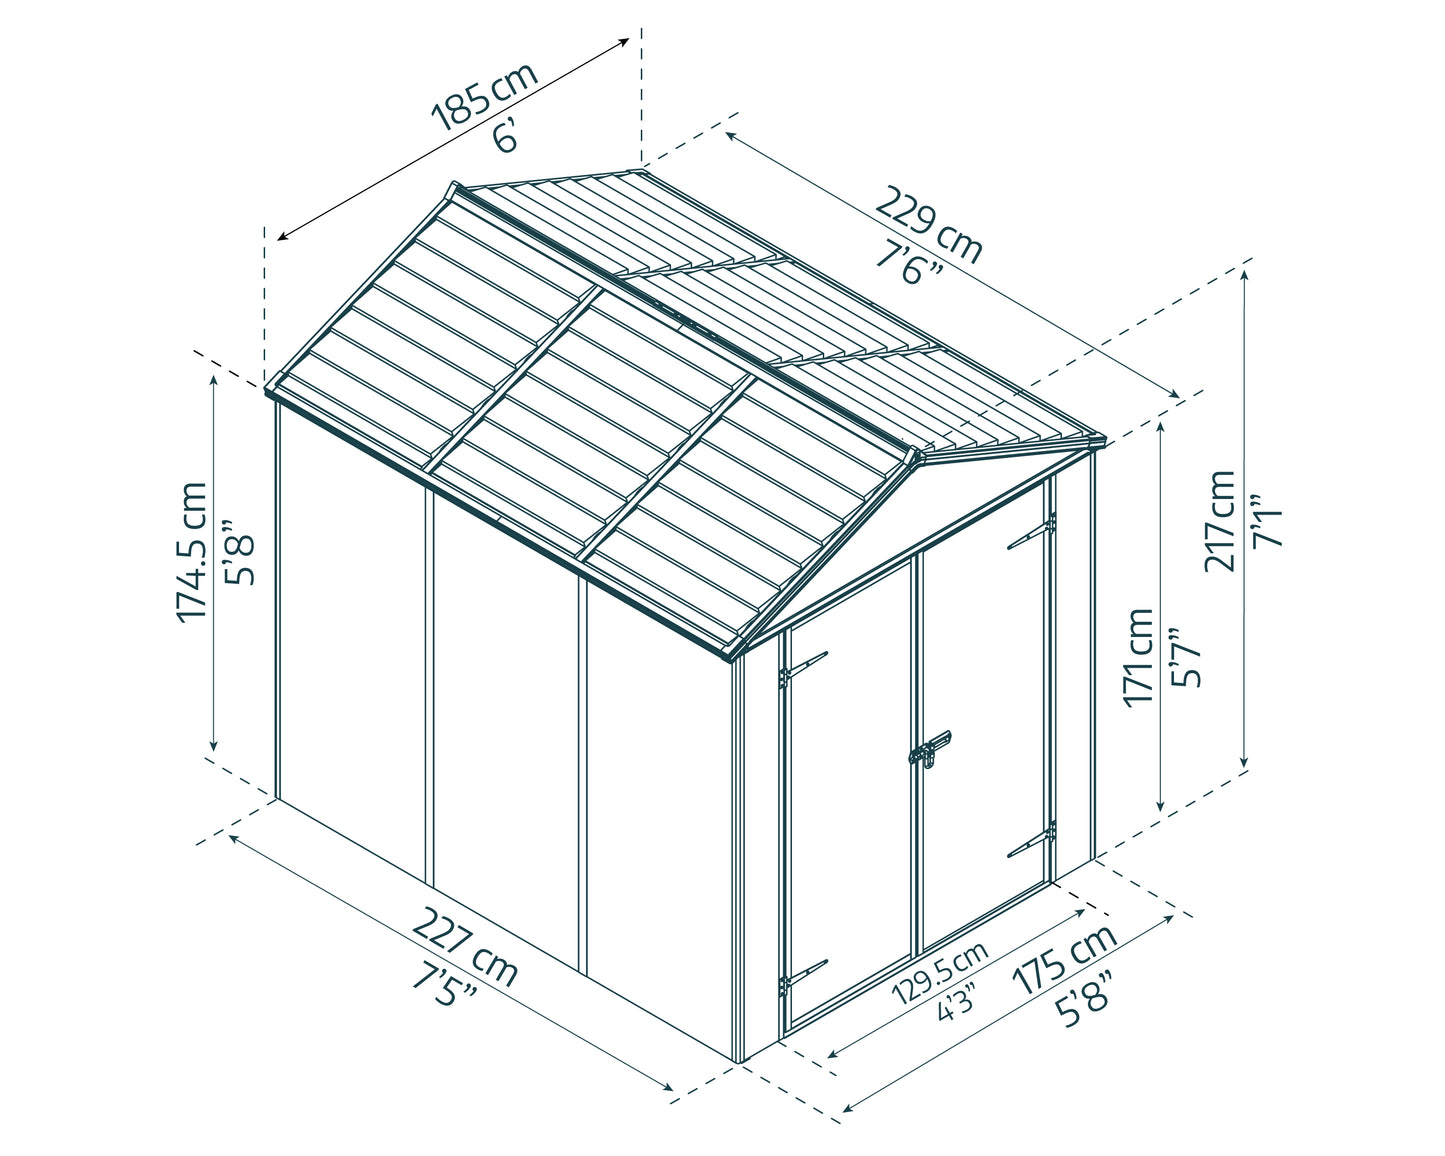 Canopia by Palram Rubicon 6 x 8  Plastic Shed